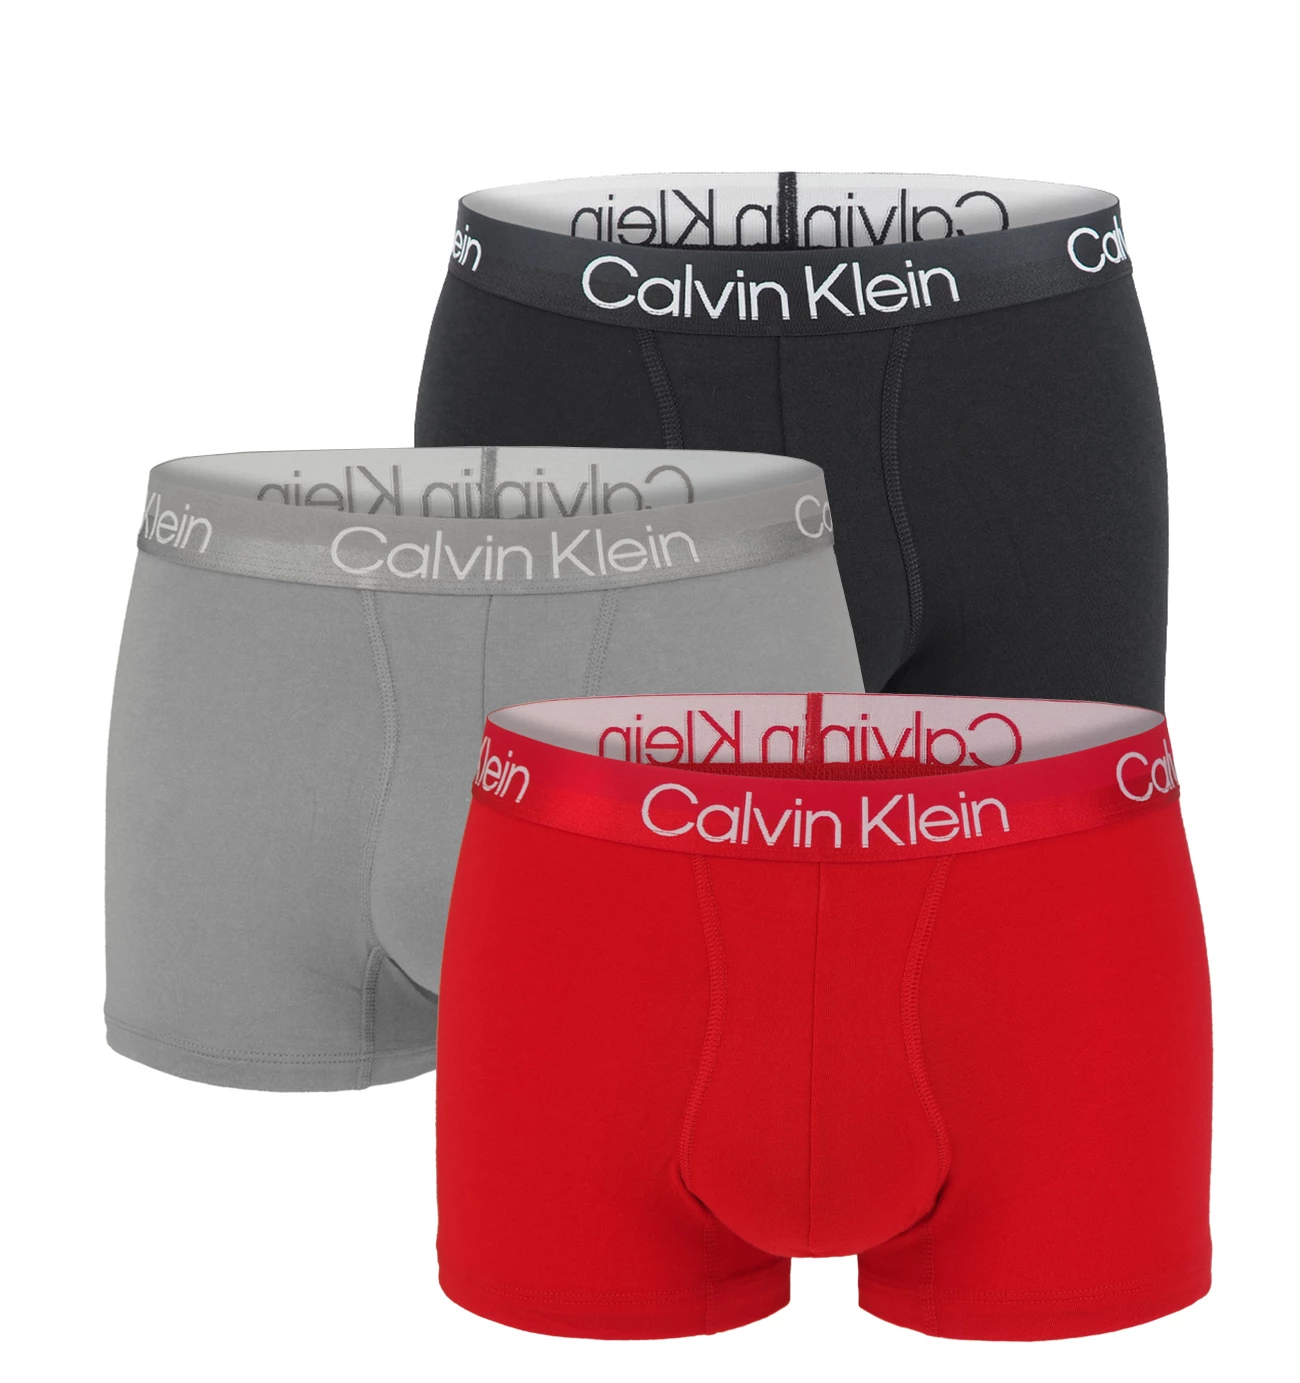 Calvin Klein - boxerky 3PACK modern structure red and gray - limitovaná edícia